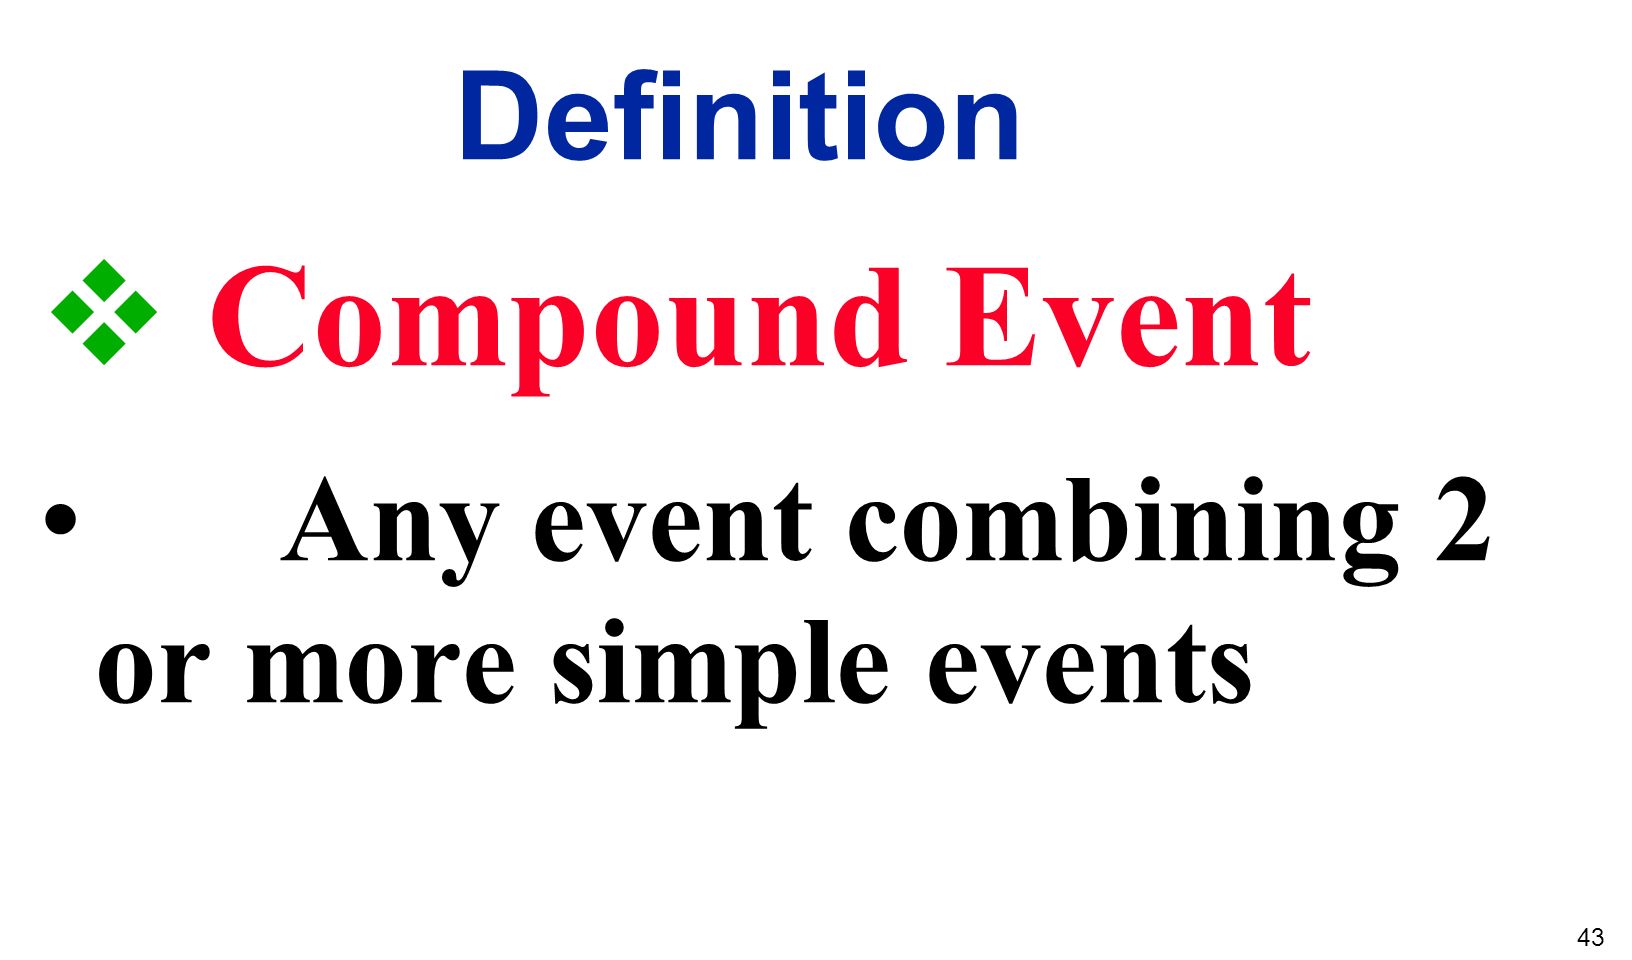 1 Event Any Collection Of Results Or Outcomes From Some Procedure Simple Event Any Outcome Or Event That Cannot Be Broken Down Into Simpler Components Ppt Download